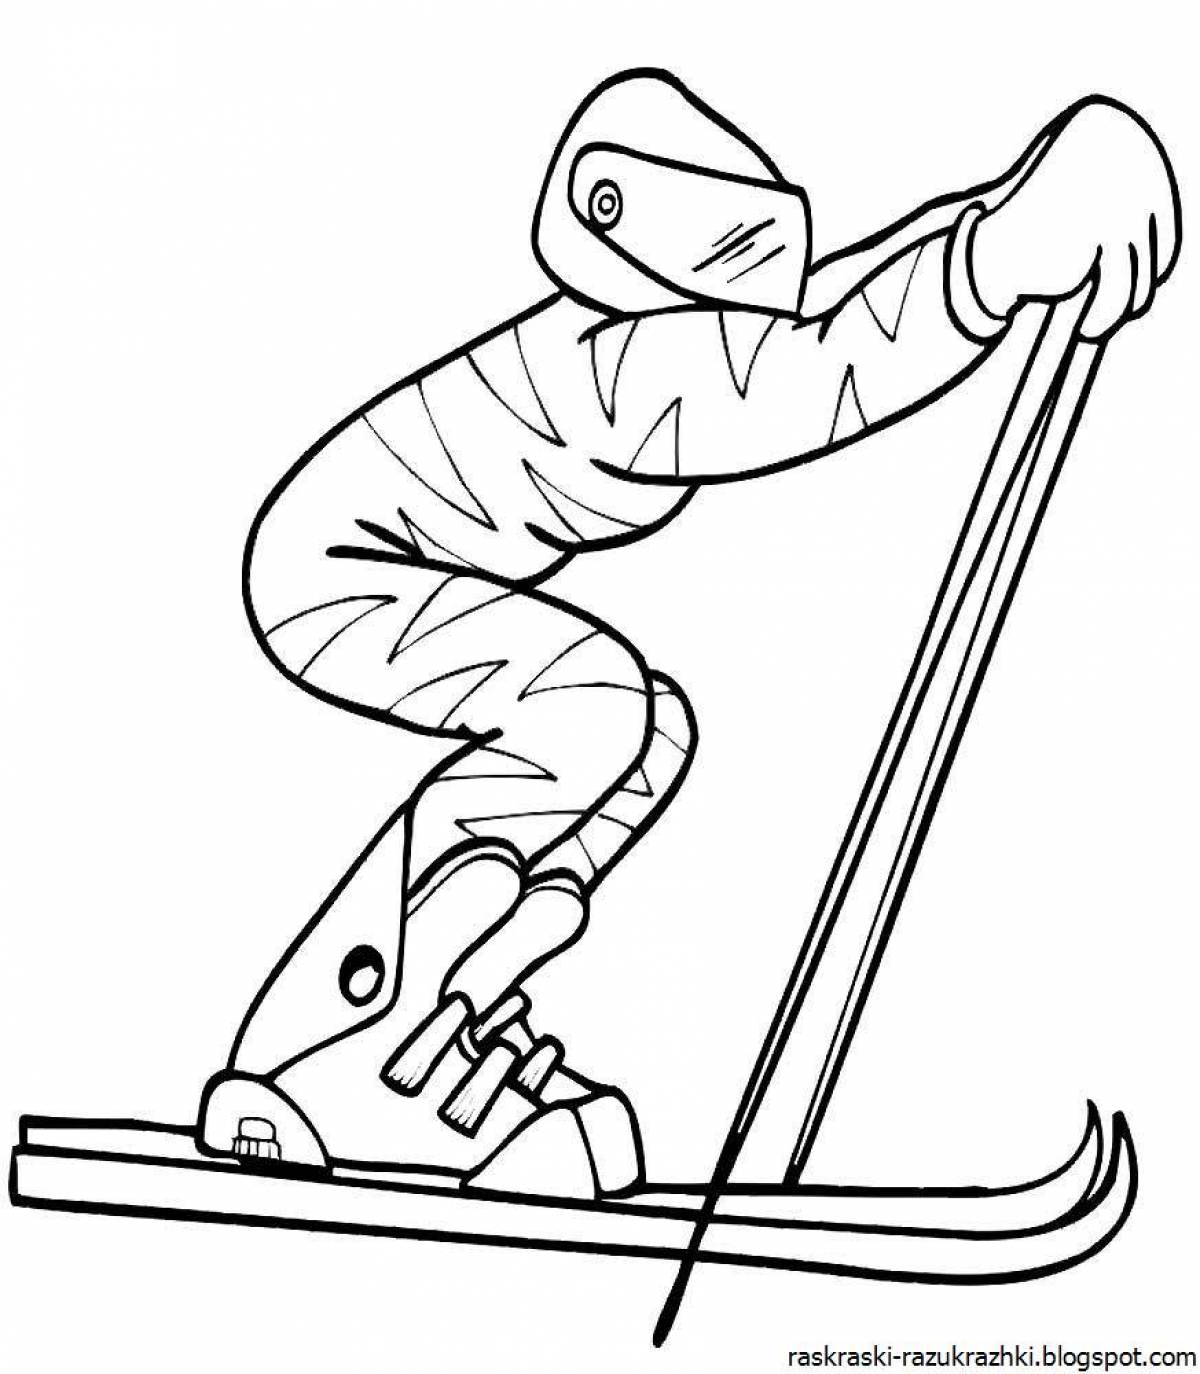 Great skier coloring page